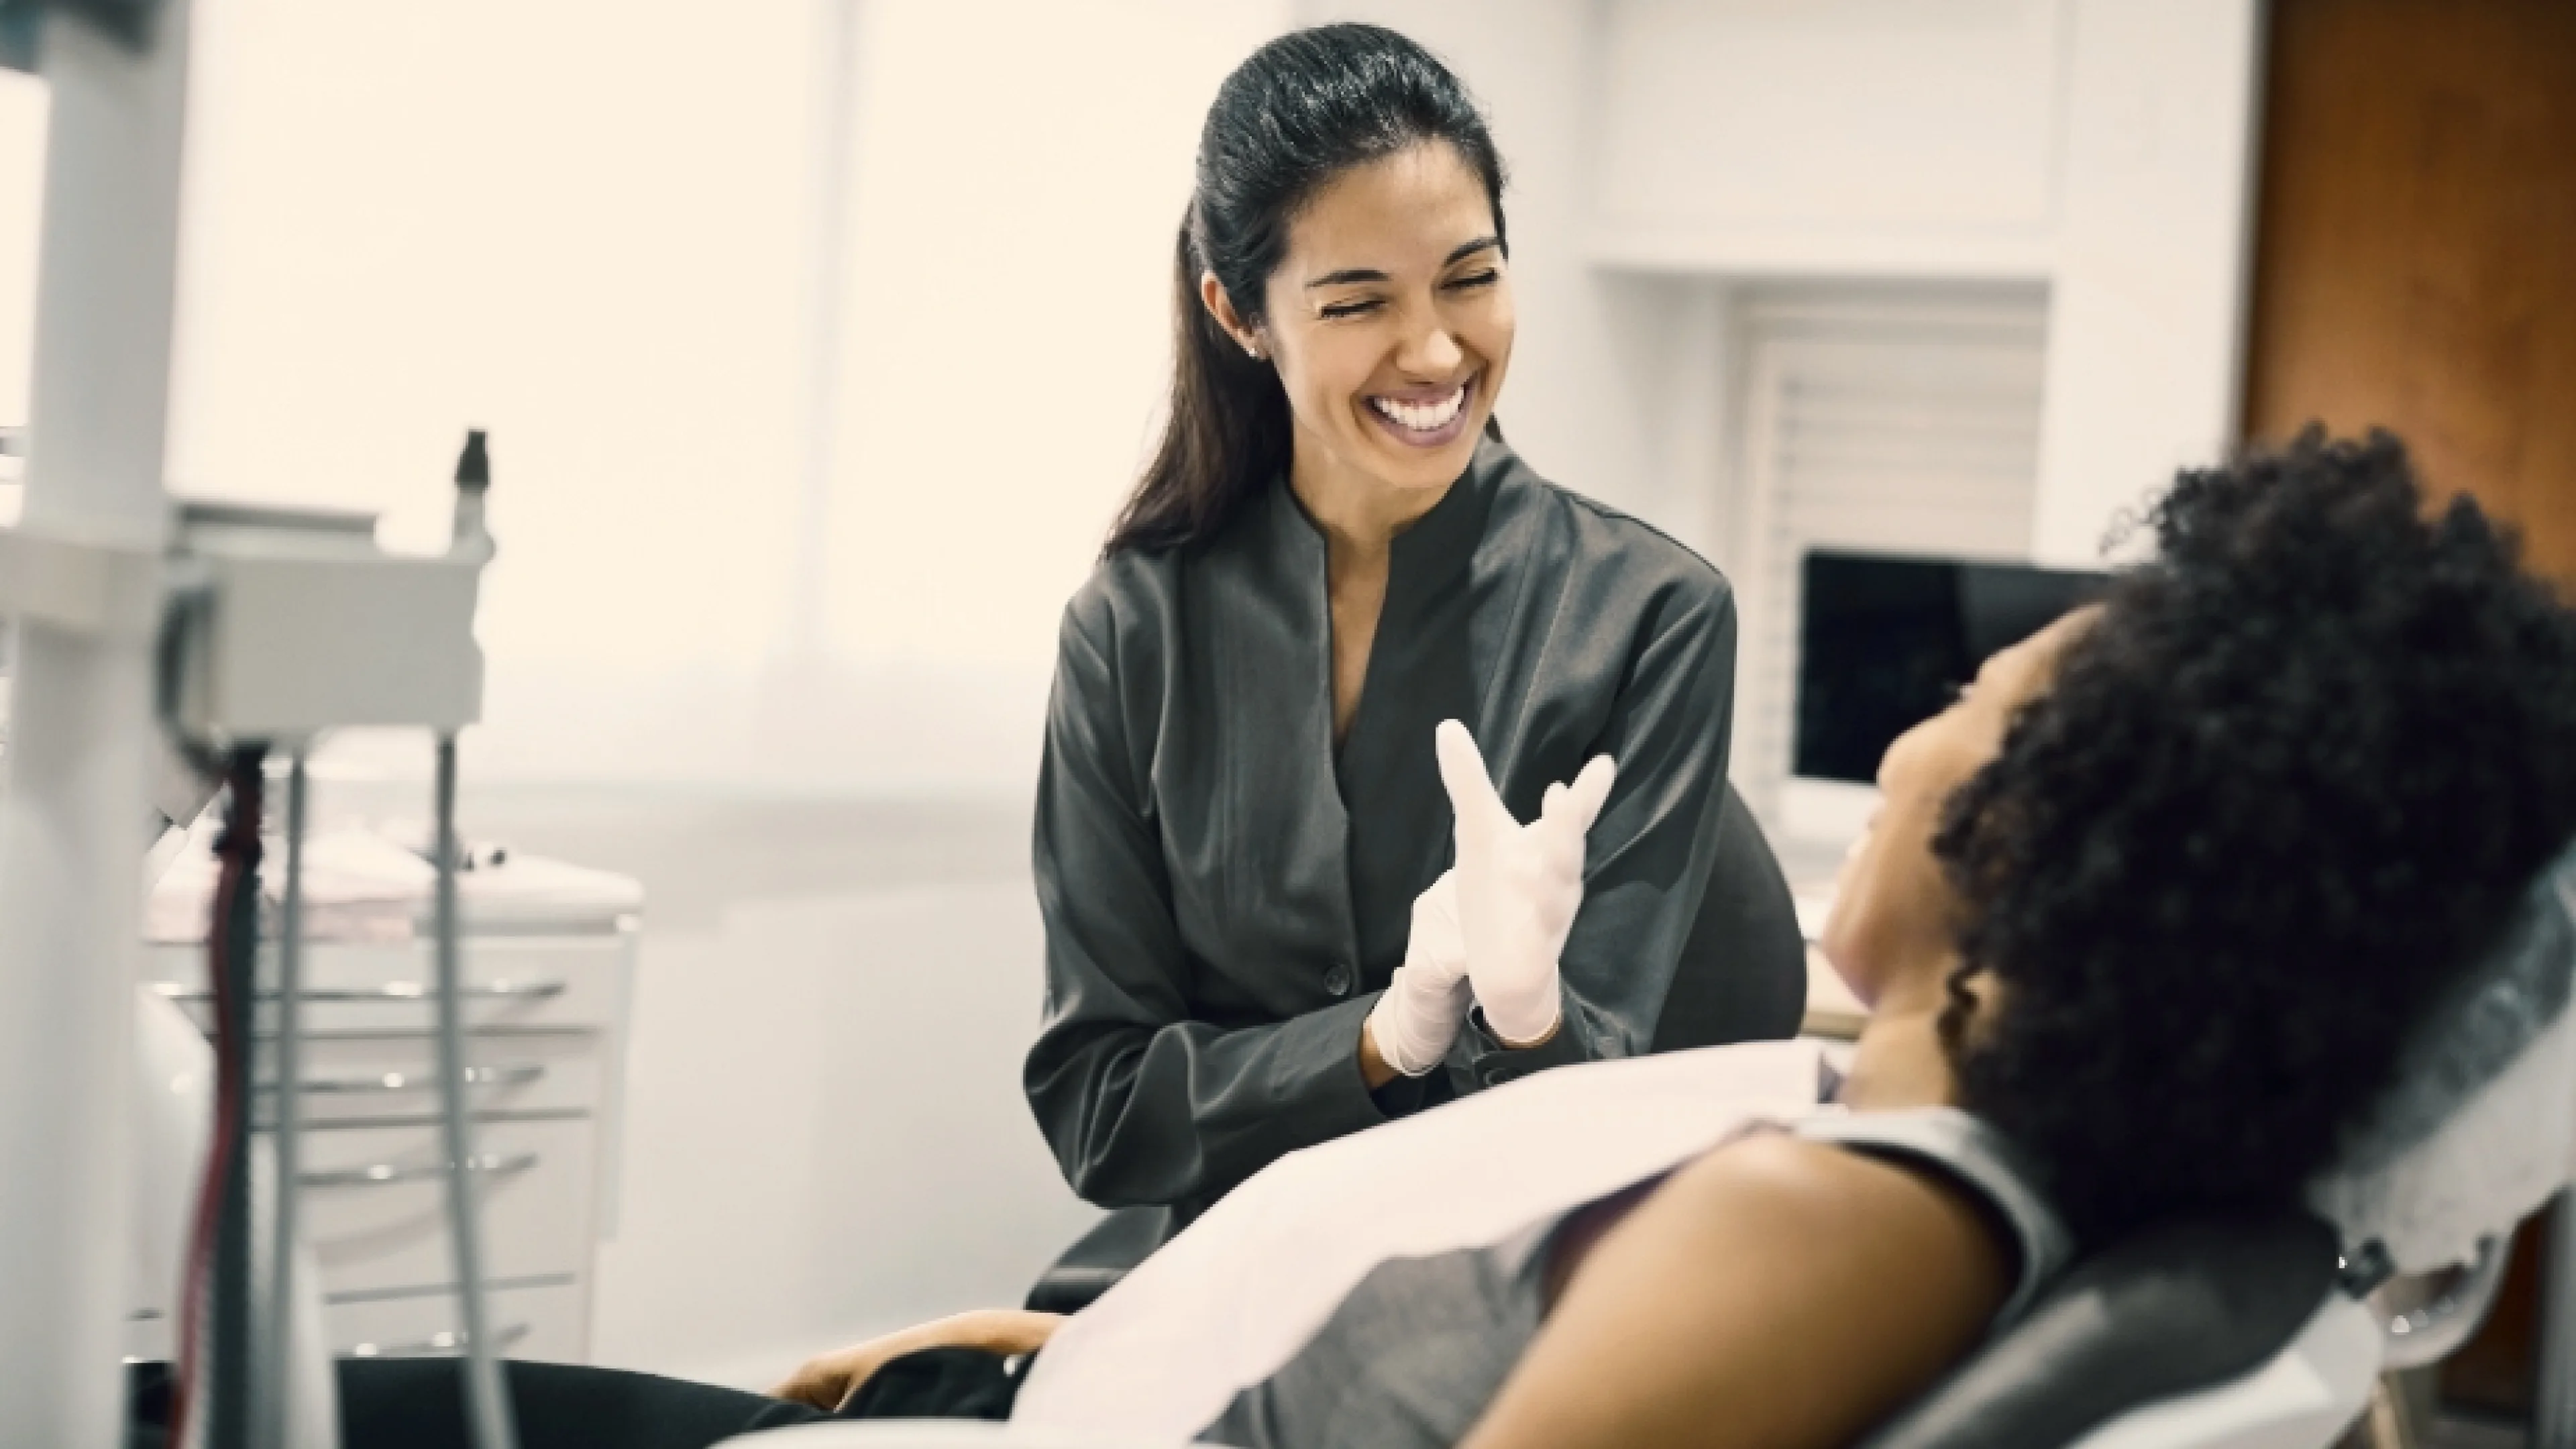 Dental assistant smiling at patient during explanation